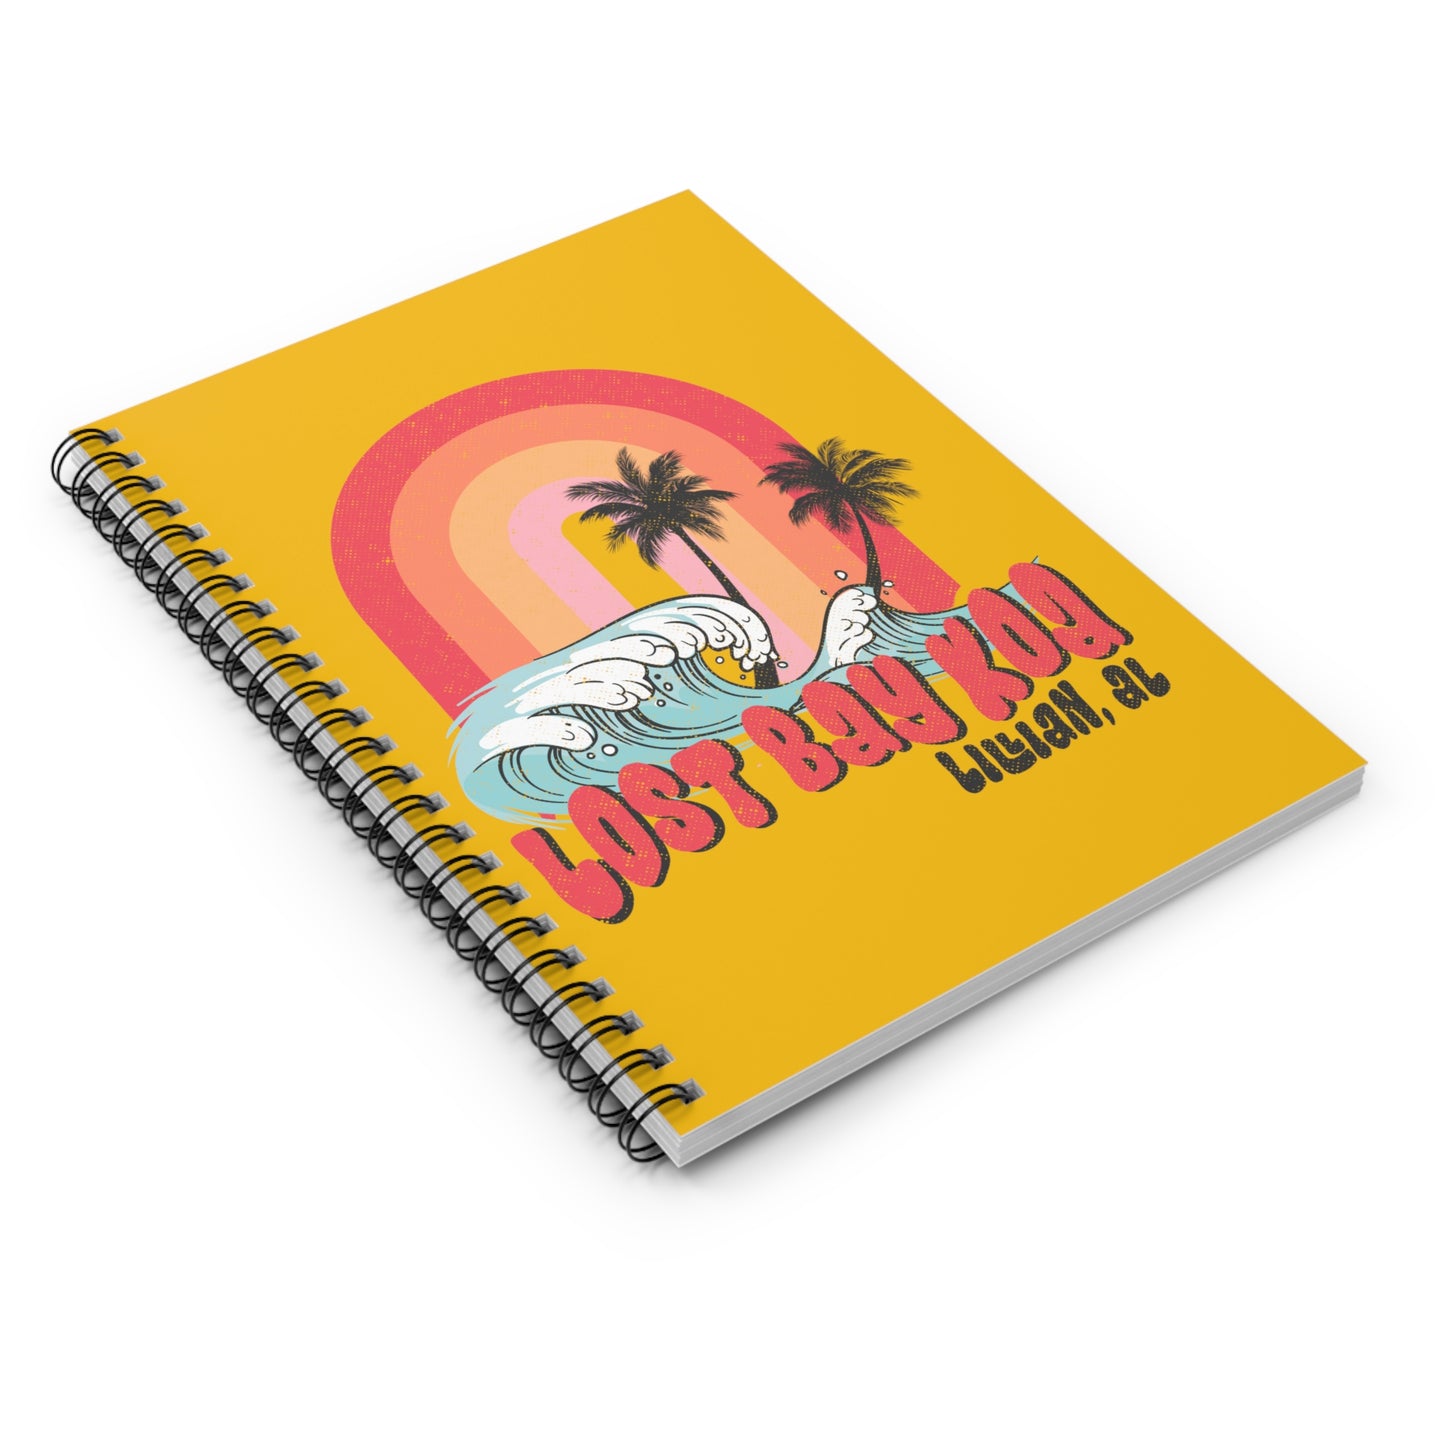 Lost Bay Wave- Spiral Notebook - Ruled Line